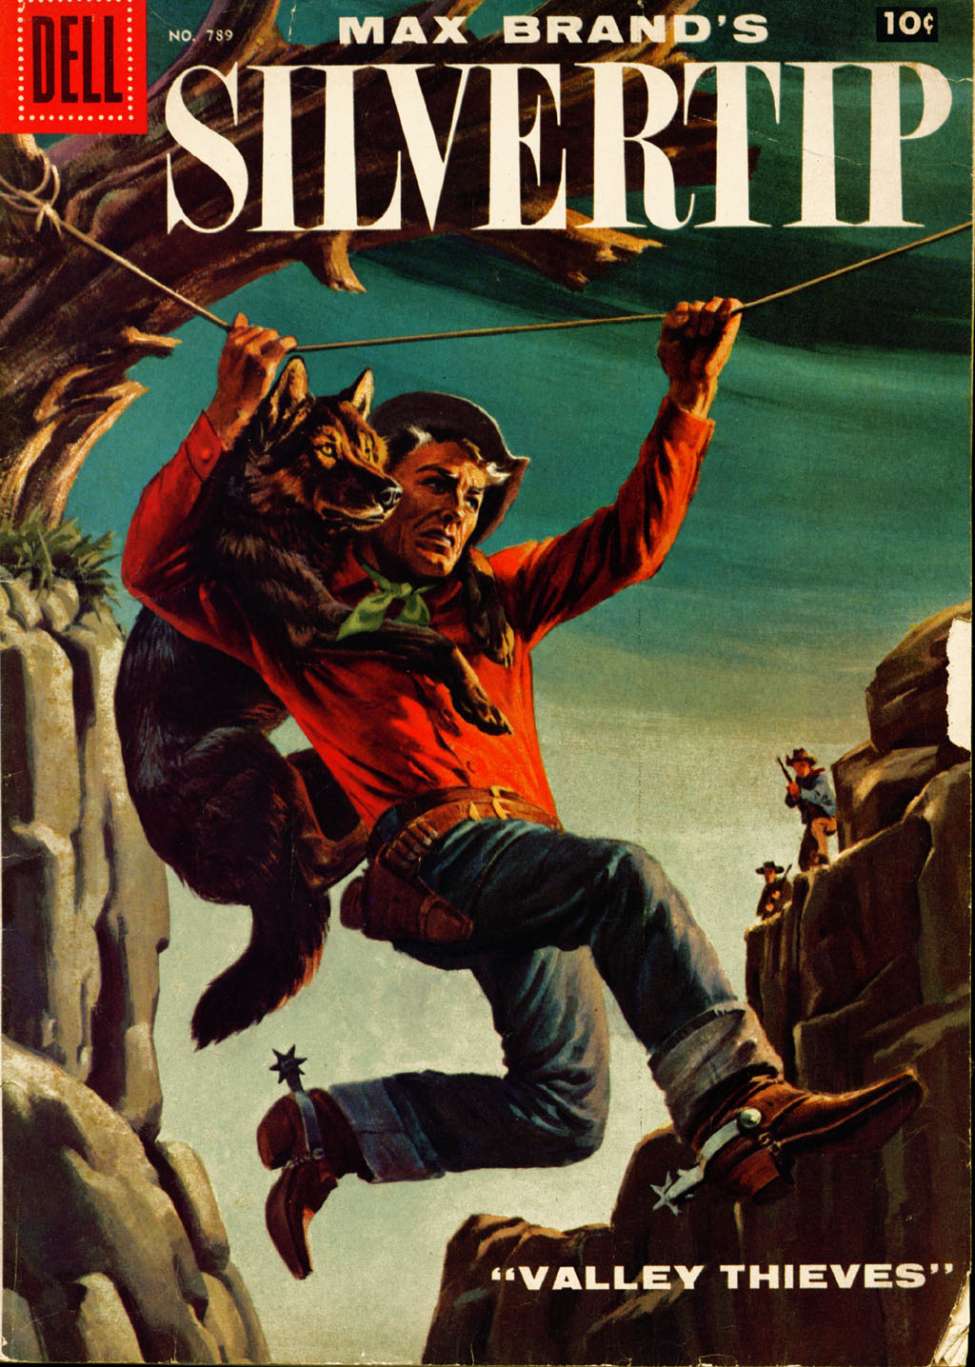 Book Cover For 0789 - Max Brand's Silvertip